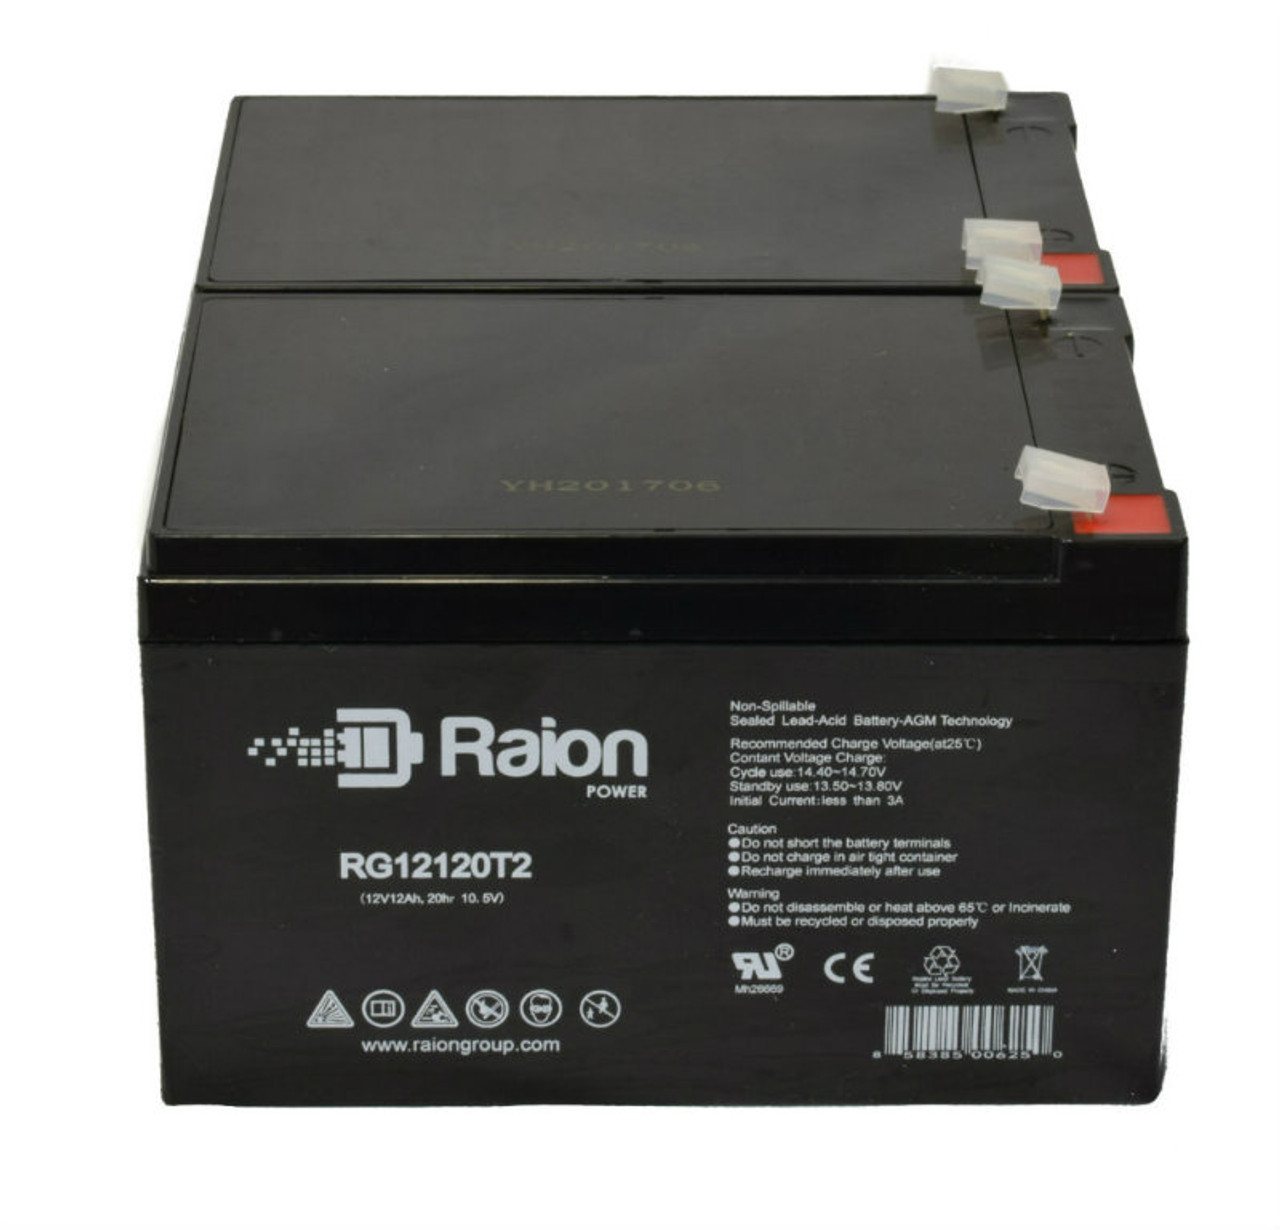 Raion Power 12V 12Ah Replacement Alarm Security System Battery for Altronix AL802UL2ADAJ - 2 Pack